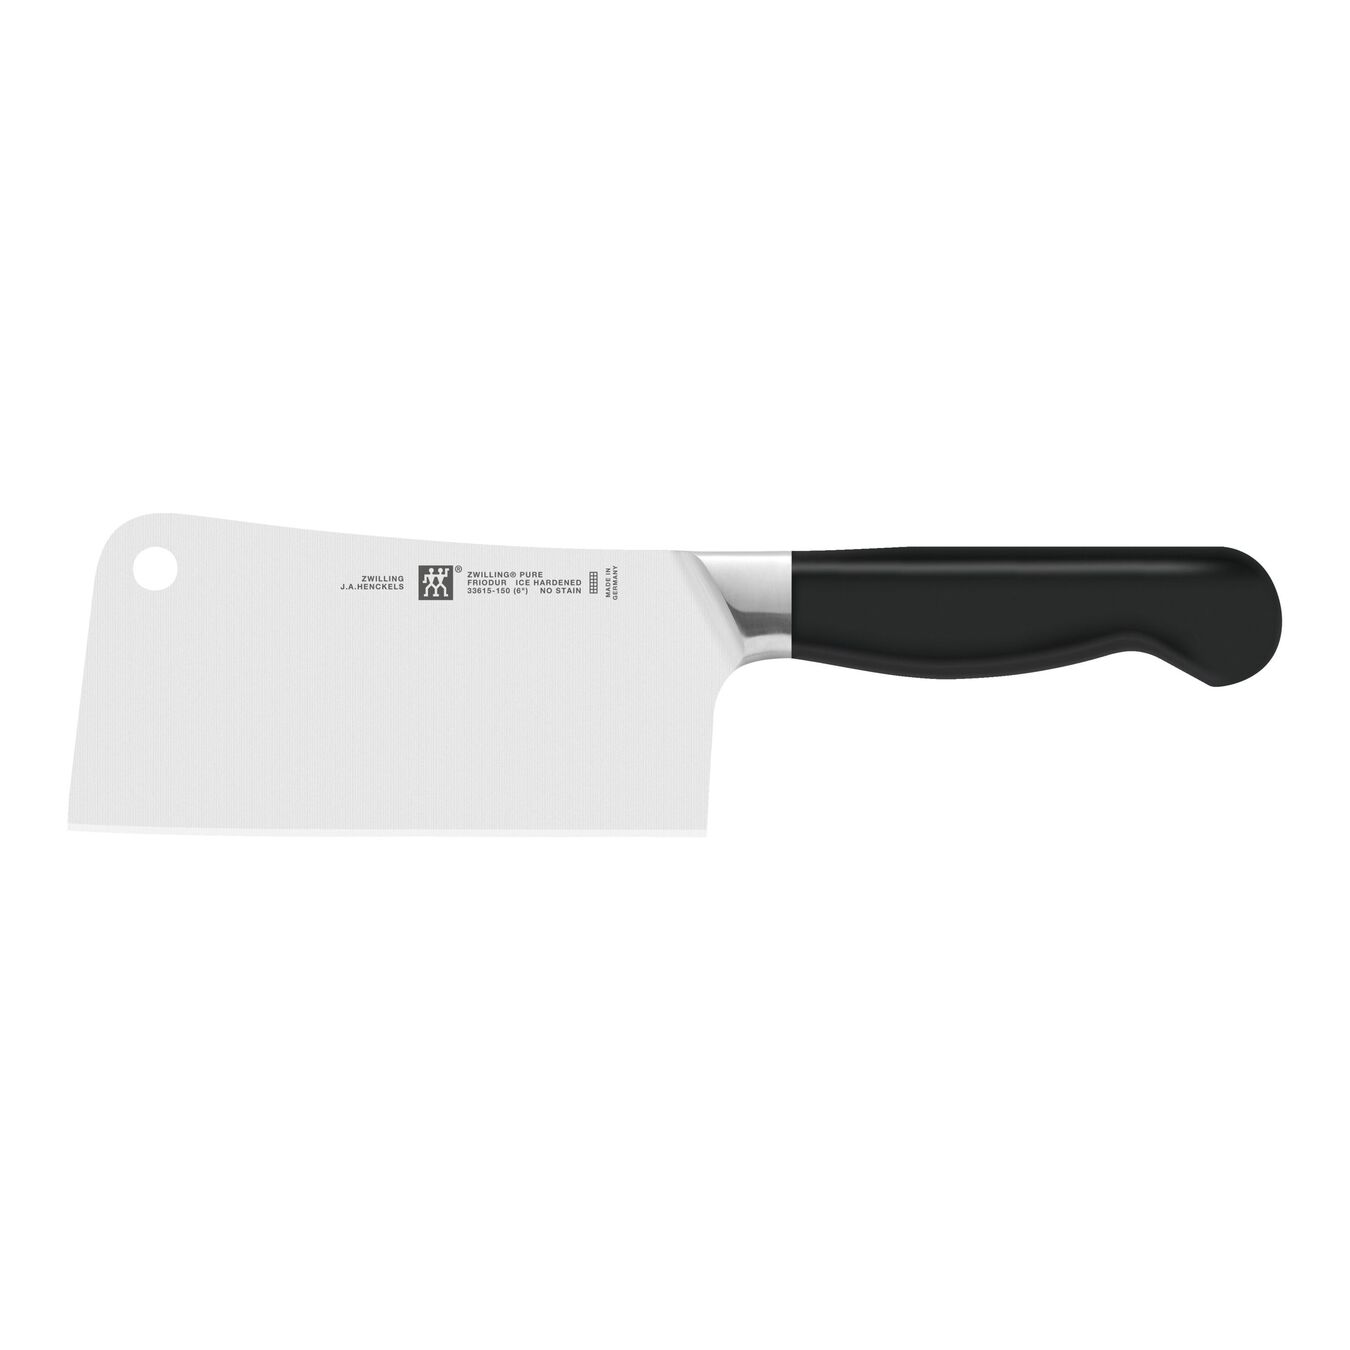 6 inch Cleaver - Visual Imperfections,,large 1